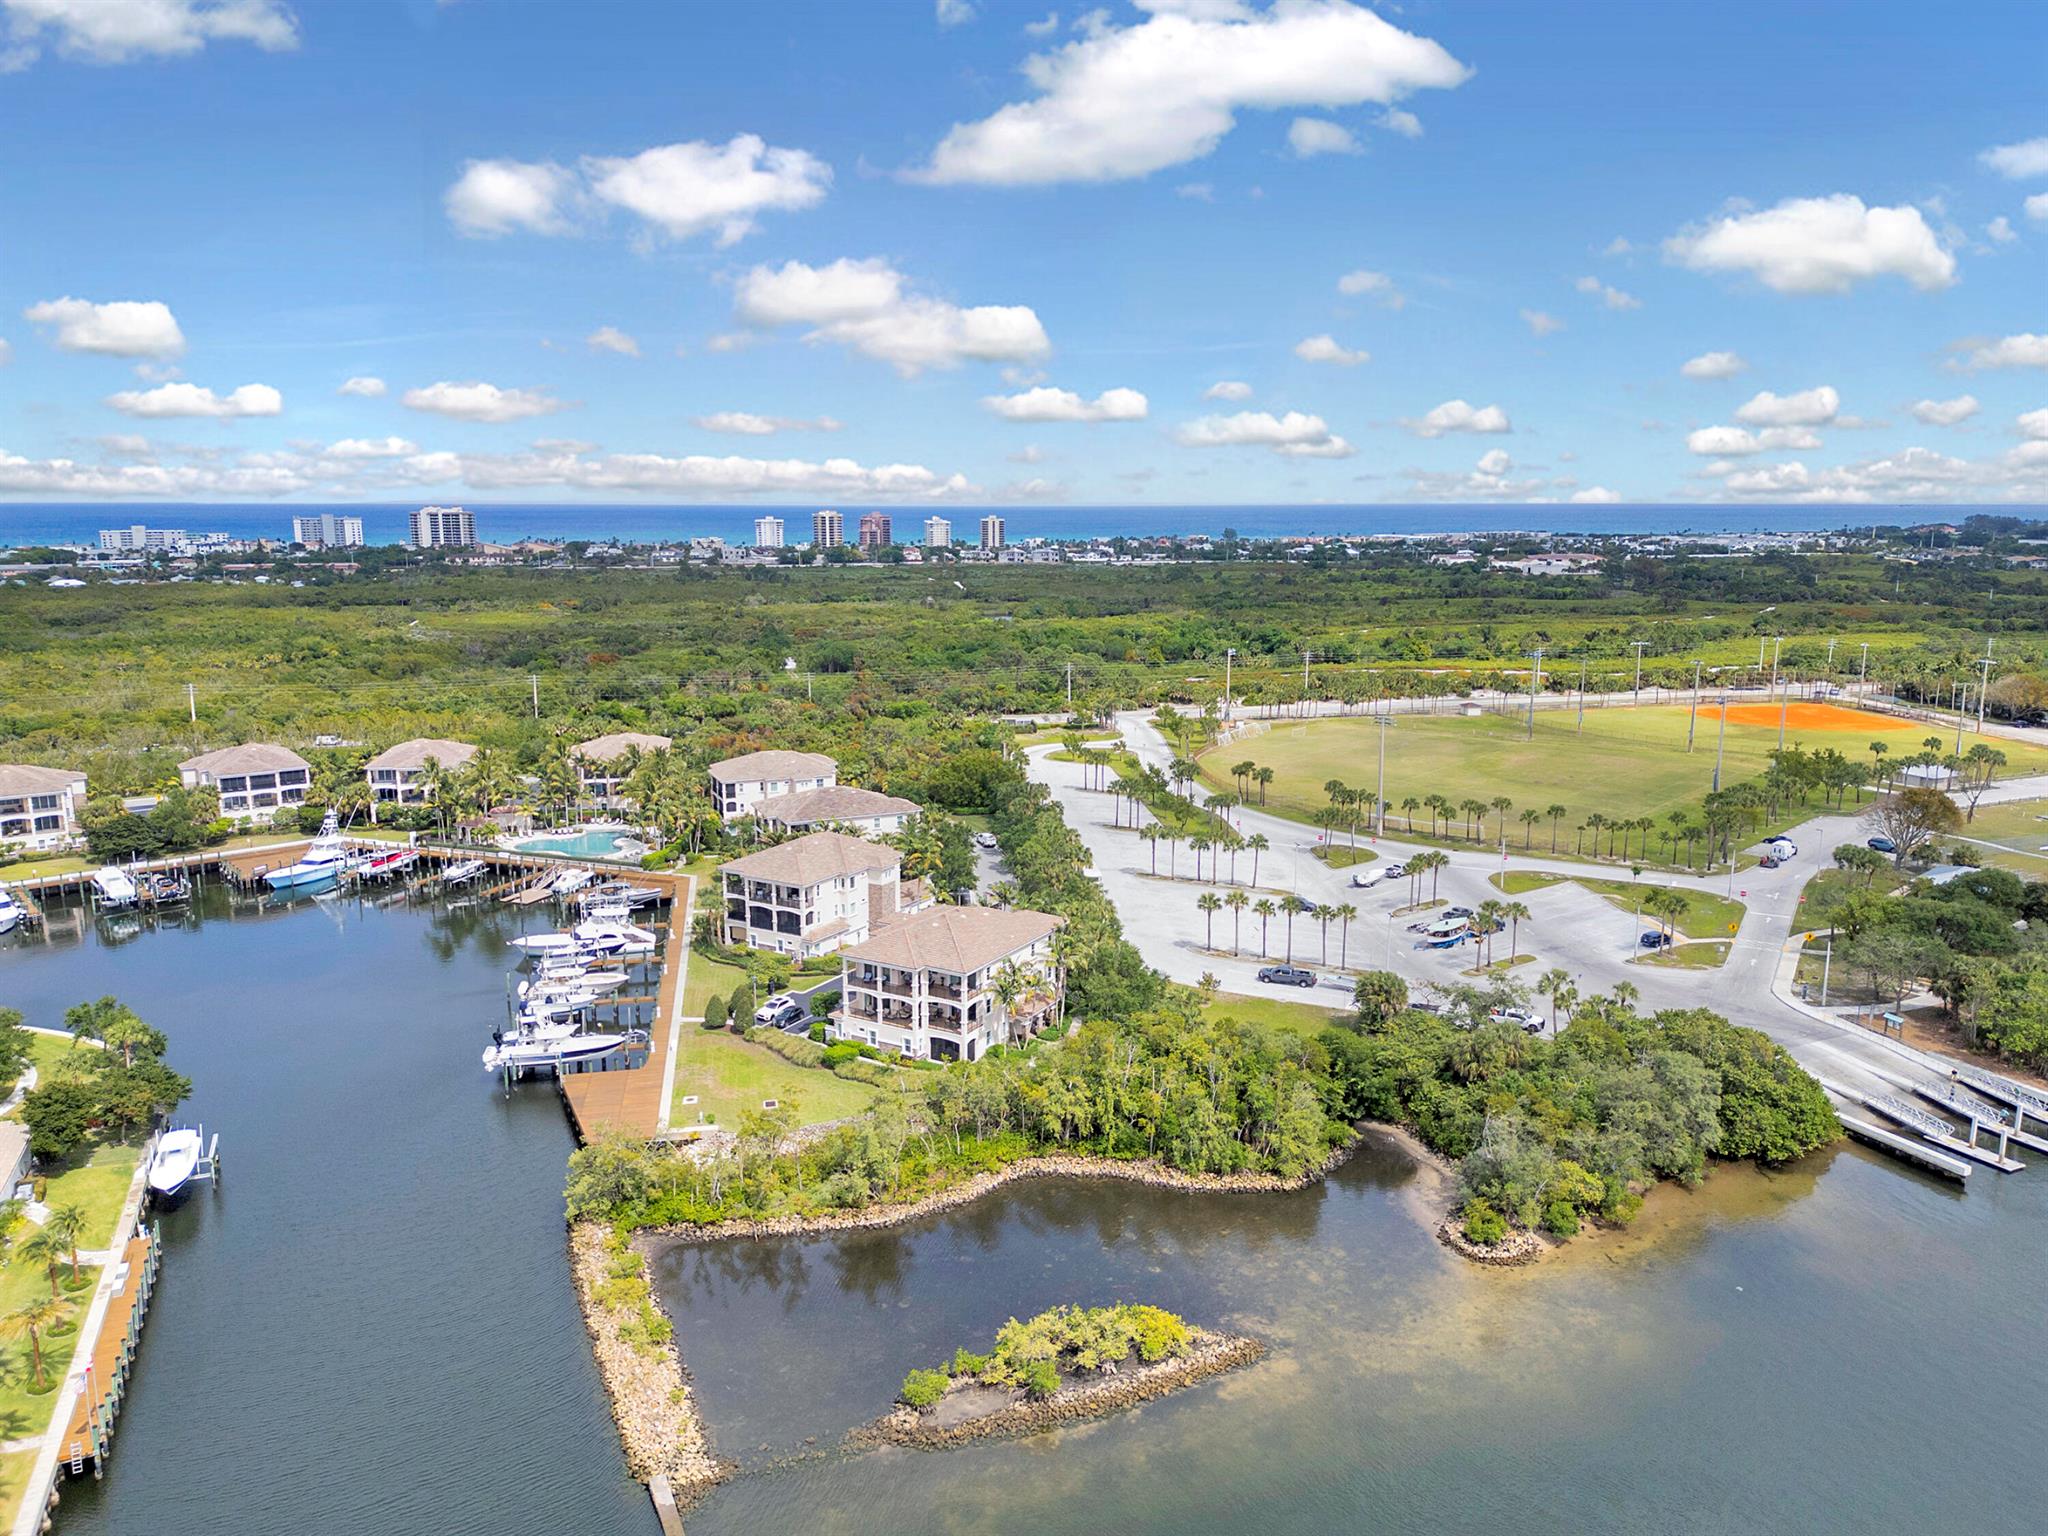 RARELY AVAILABLE! MAGICAL EXPANSIVE INTRACOASTAL WATERVIEWS the moment you enter this Penthouse residence. Boaters dream. Bring your 60 ft yacht and water toys to deeded boat slip in safe deepwater harbor. No fixed bridges. Quick access to Jupiter Inlet and Ocean. Coastal contemporary w/every imaginable upgrade. Private elevator opens to 3BD/2BA open concept floor plan loaded w/natural light. Large 2 car garage w/loads of storage.  Chefs  kitchen w/center island. Marble floors. Motorized phantom screens compliment LARGE wrap around balcony. Hurricane impact floor to ceiling sliders/windows.  Frenchmans Harbor is a 24/7 manned gated waterfront enclave of 78 residences and 30 carriage homes. Resort style pool/spa. Walking distance to pristine beaches, casual and fine dining, shopping,